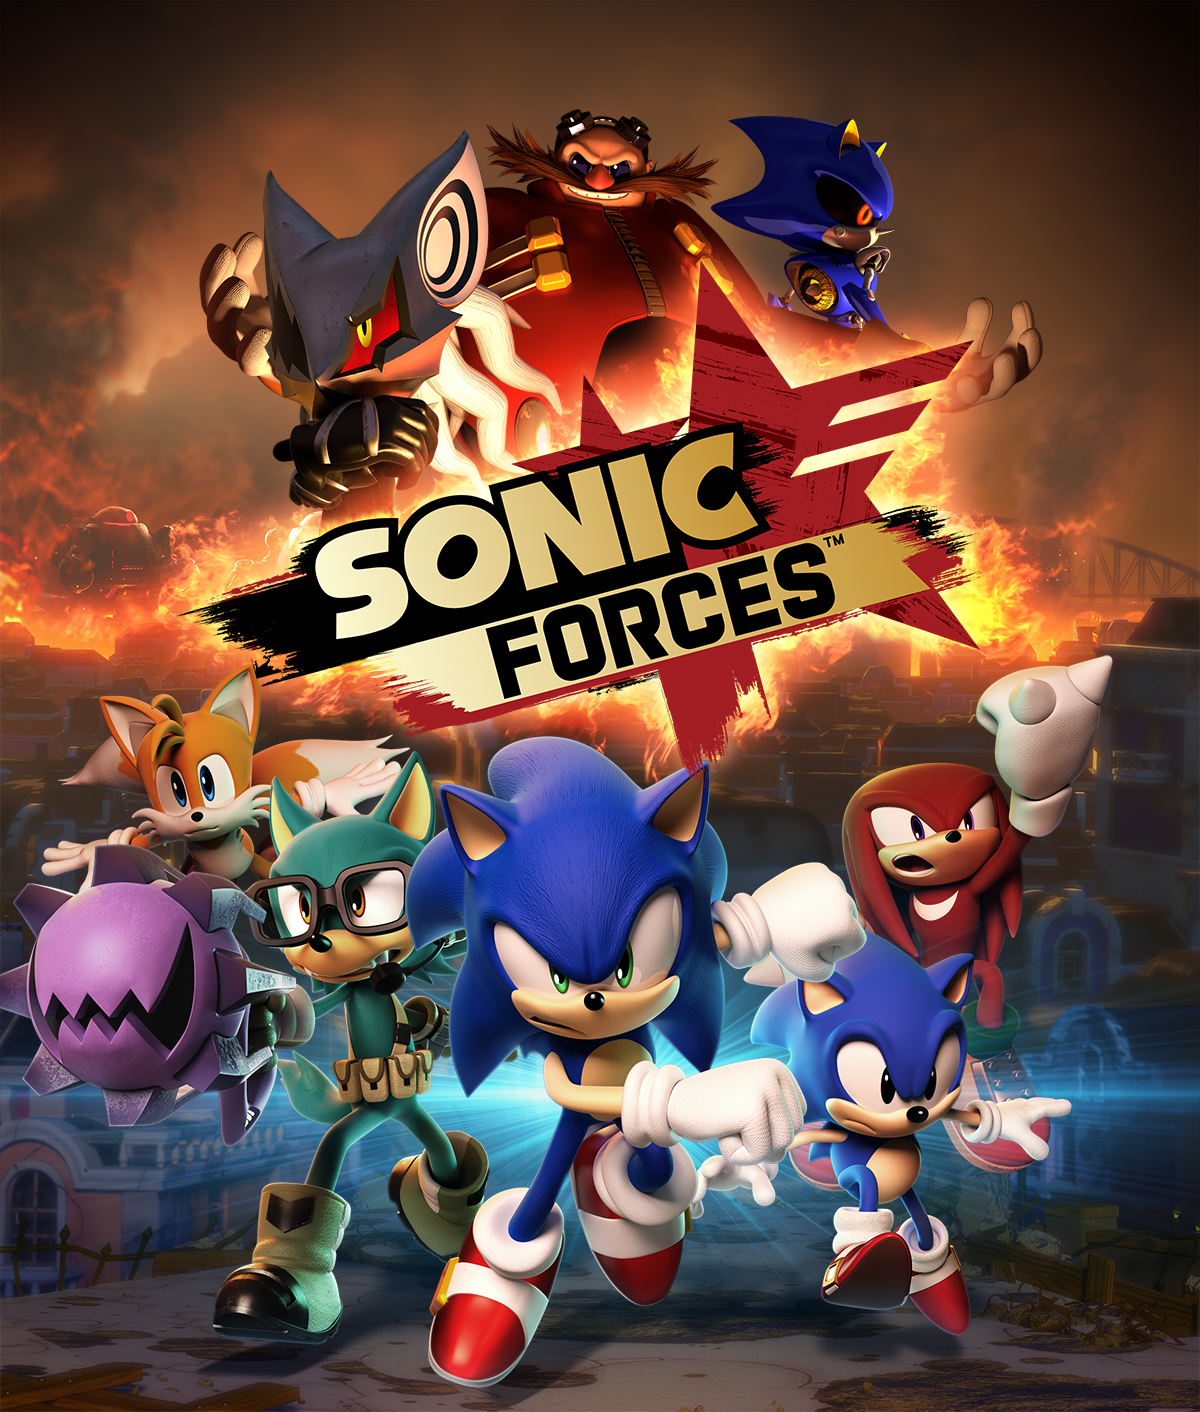 play sonic heroes at any resolution